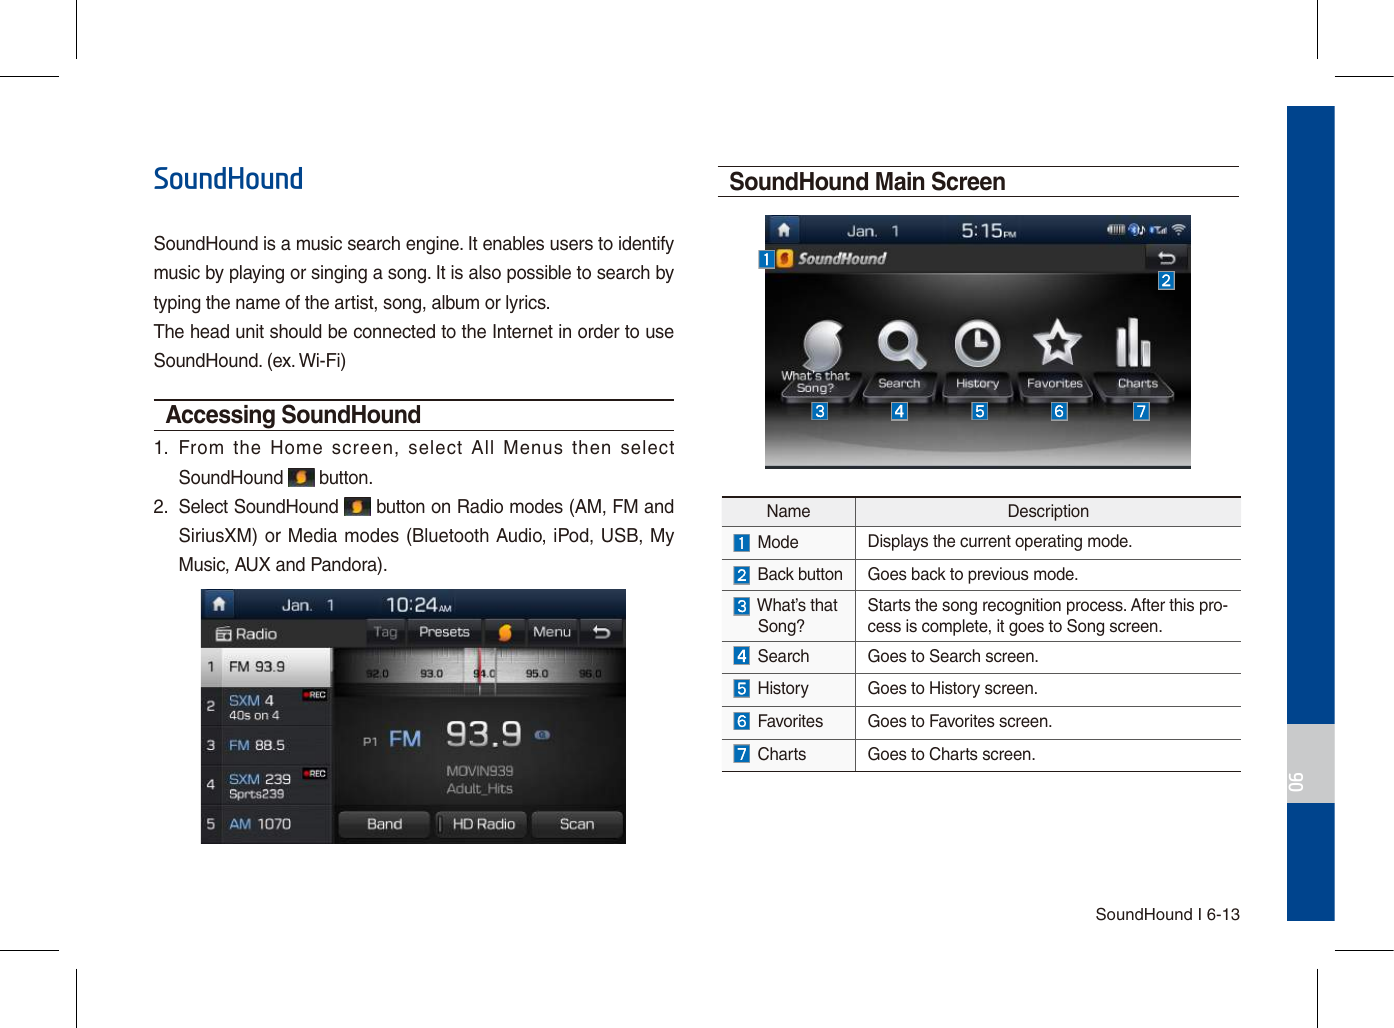 SoundHound I 6-1306SoundHoundSoundHound is a music search engine. It enables users to identify music by playing or singing a song. It is also possible to search by typing the name of the artist, song, album or lyrics.The head unit should be connected to the Internet in order to use SoundHound. (ex. Wi-Fi)Accessing SoundHound 1.   From  the  Home  screen,  select  All  Menus  then  select SoundHound   button.2.   Select SoundHound   button on Radio modes (AM, FM and SiriusXM) or Media modes (Bluetooth Audio, iPod, USB, My Music, AUX and Pandora). SoundHound Main ScreenName Description Mode Displays the current operating mode.  Back button Goes back to previous mode.  What’s that   Song? Starts the song recognition process. After this pro-cess is complete, it goes to Song screen.  Search Goes to Search screen. History Goes to History screen.  Favorites Goes to Favorites screen. Charts Goes to Charts screen.